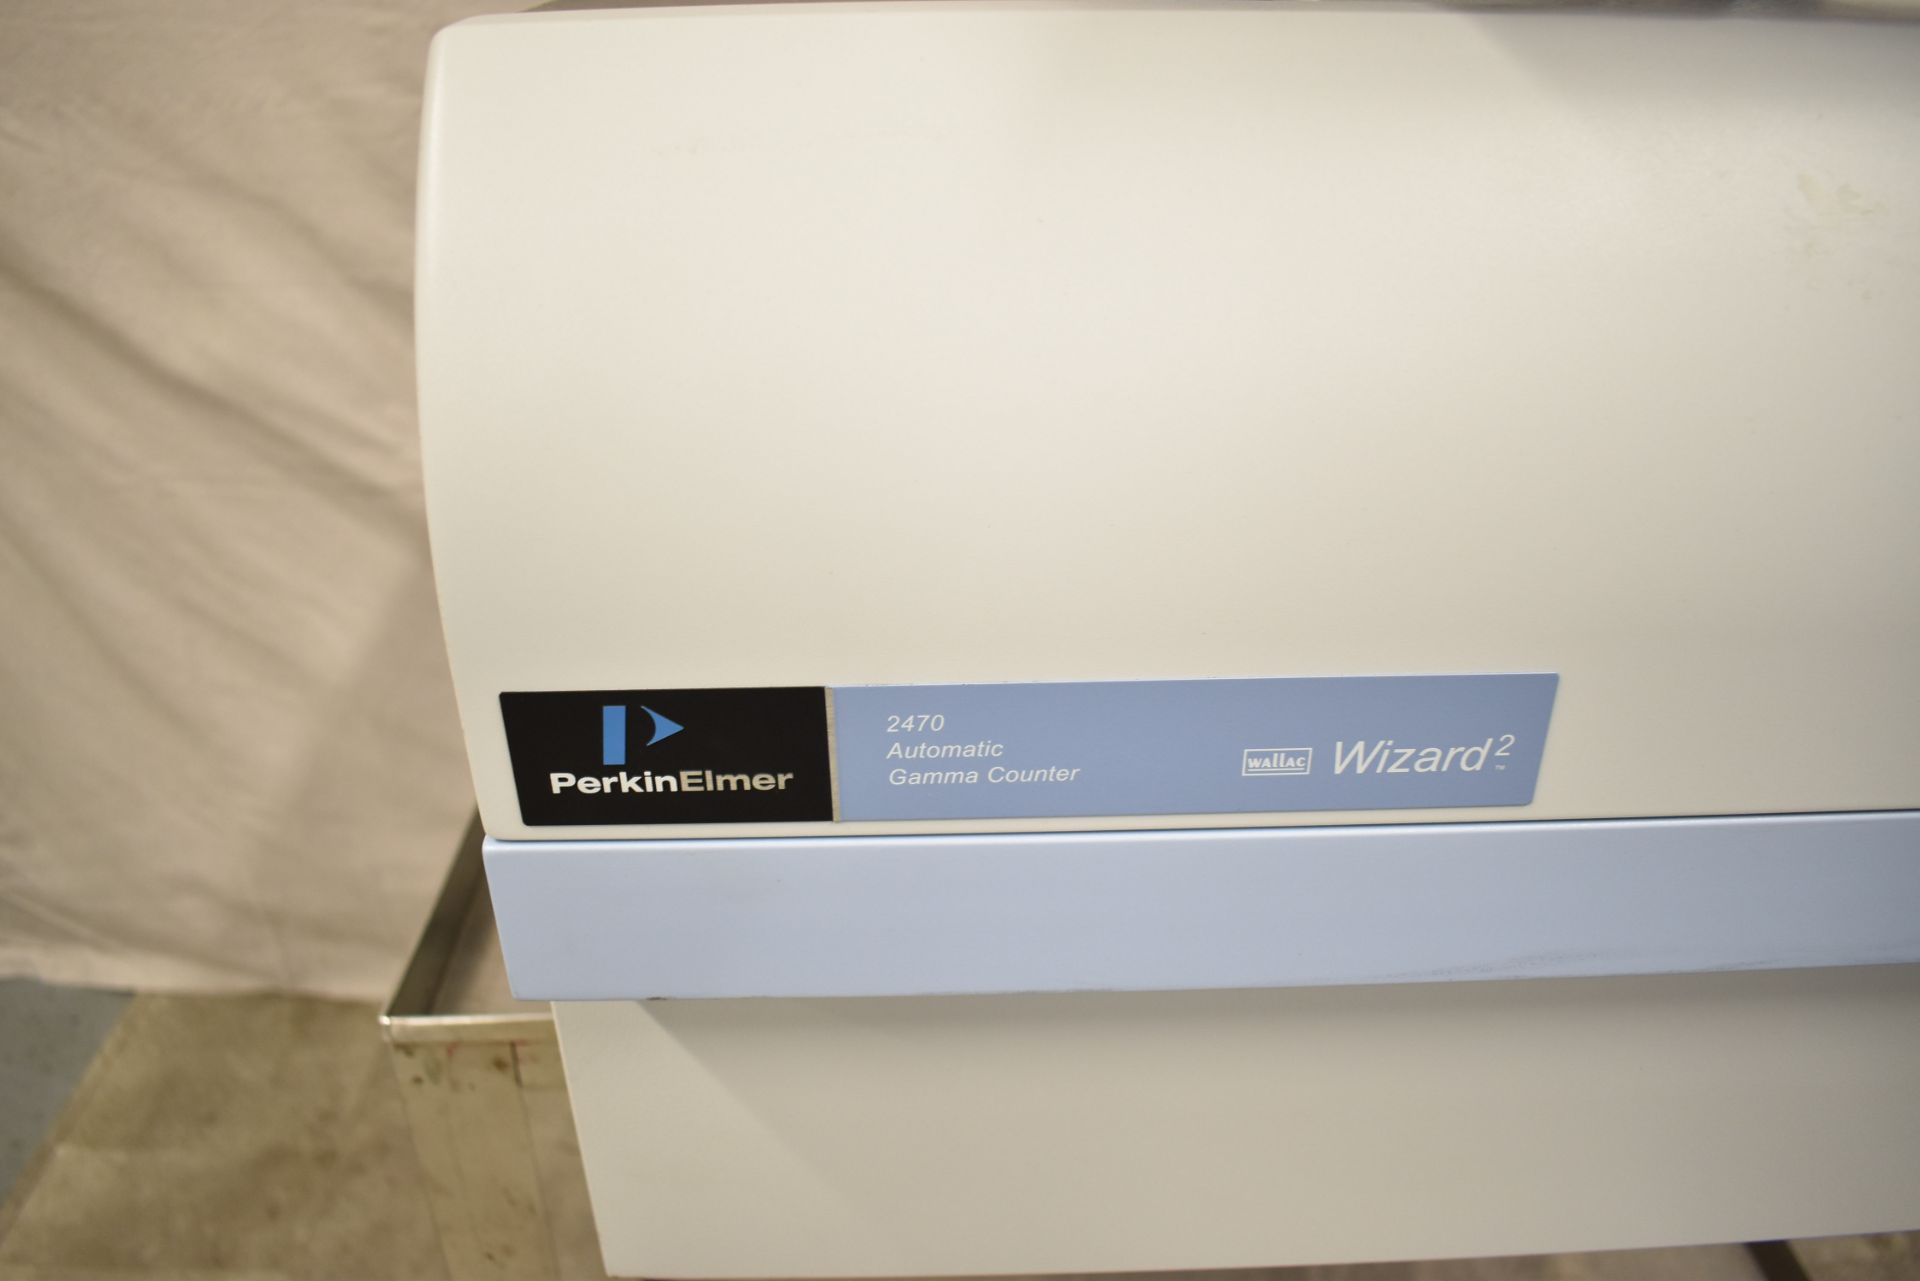 PERKIN ELMER (2011) 2470 WIZARD 2 AUTOMATIC GAMMA COUNTER WITH COLOR TOUCH SCREEN CONTROL, 13MM DIA. - Image 5 of 11